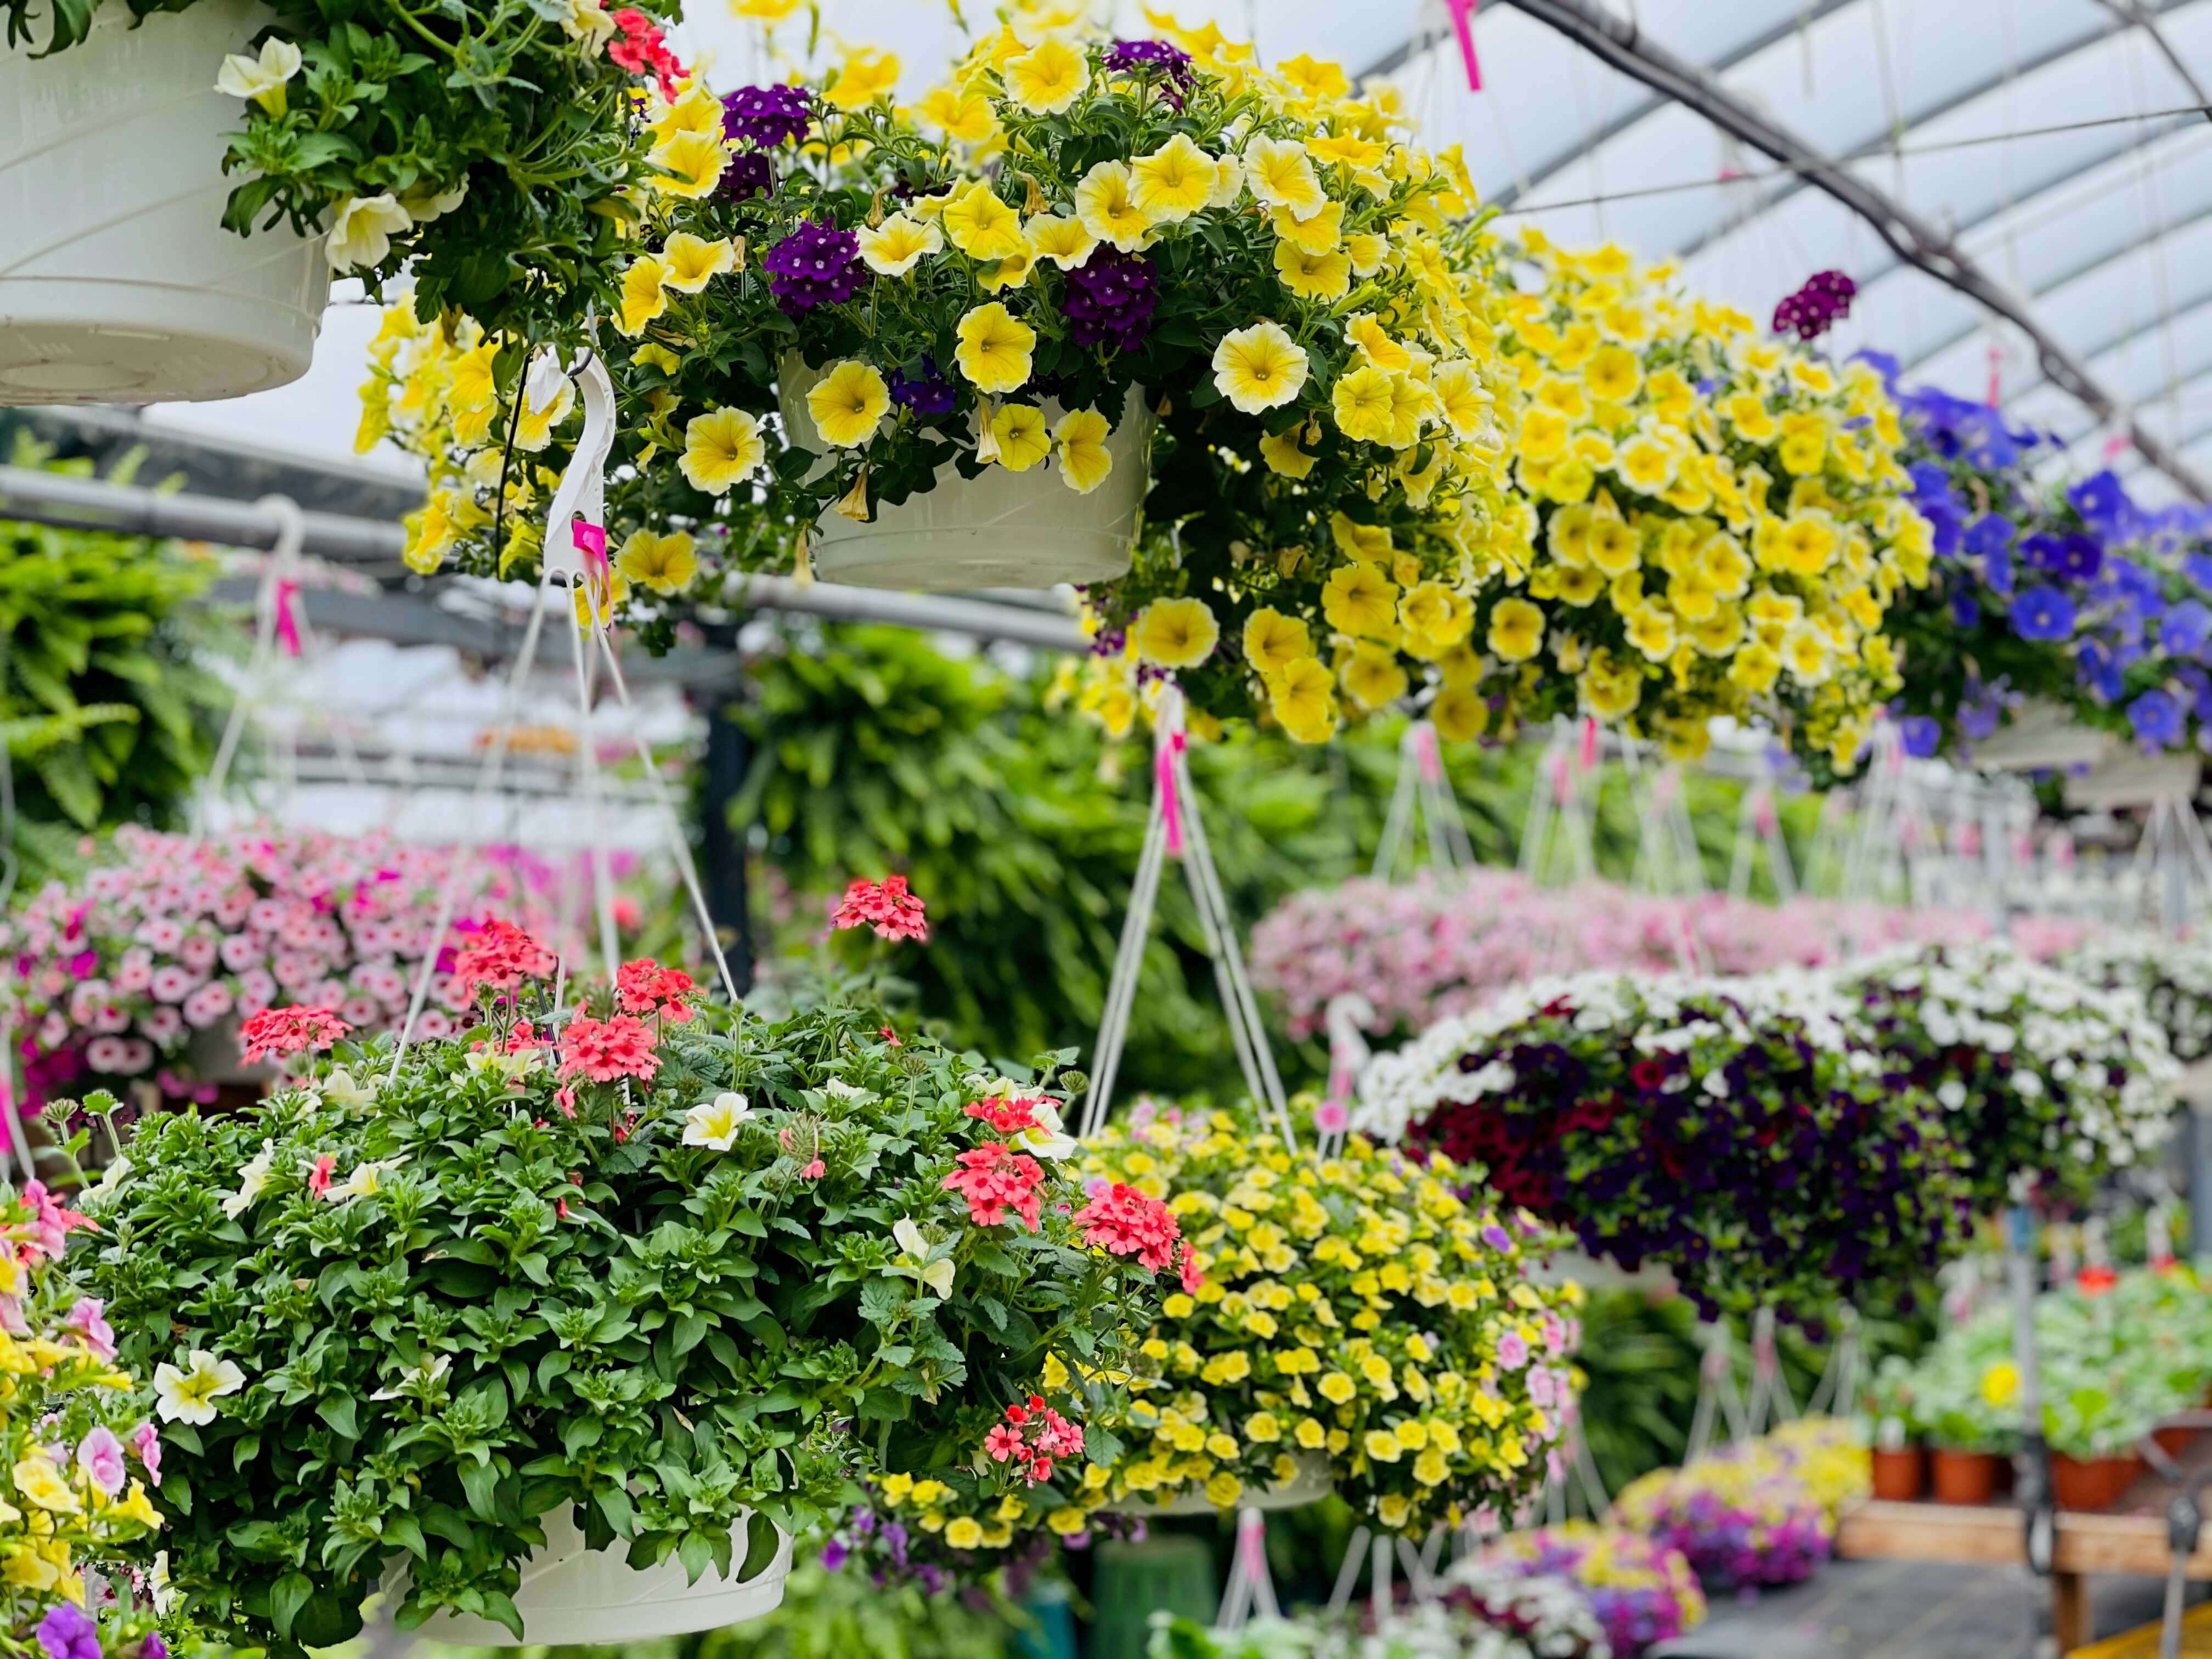 Beautiful large flower baskets in the greenhouse at Keil's Produce and Greenhouse, Swanton, OH.